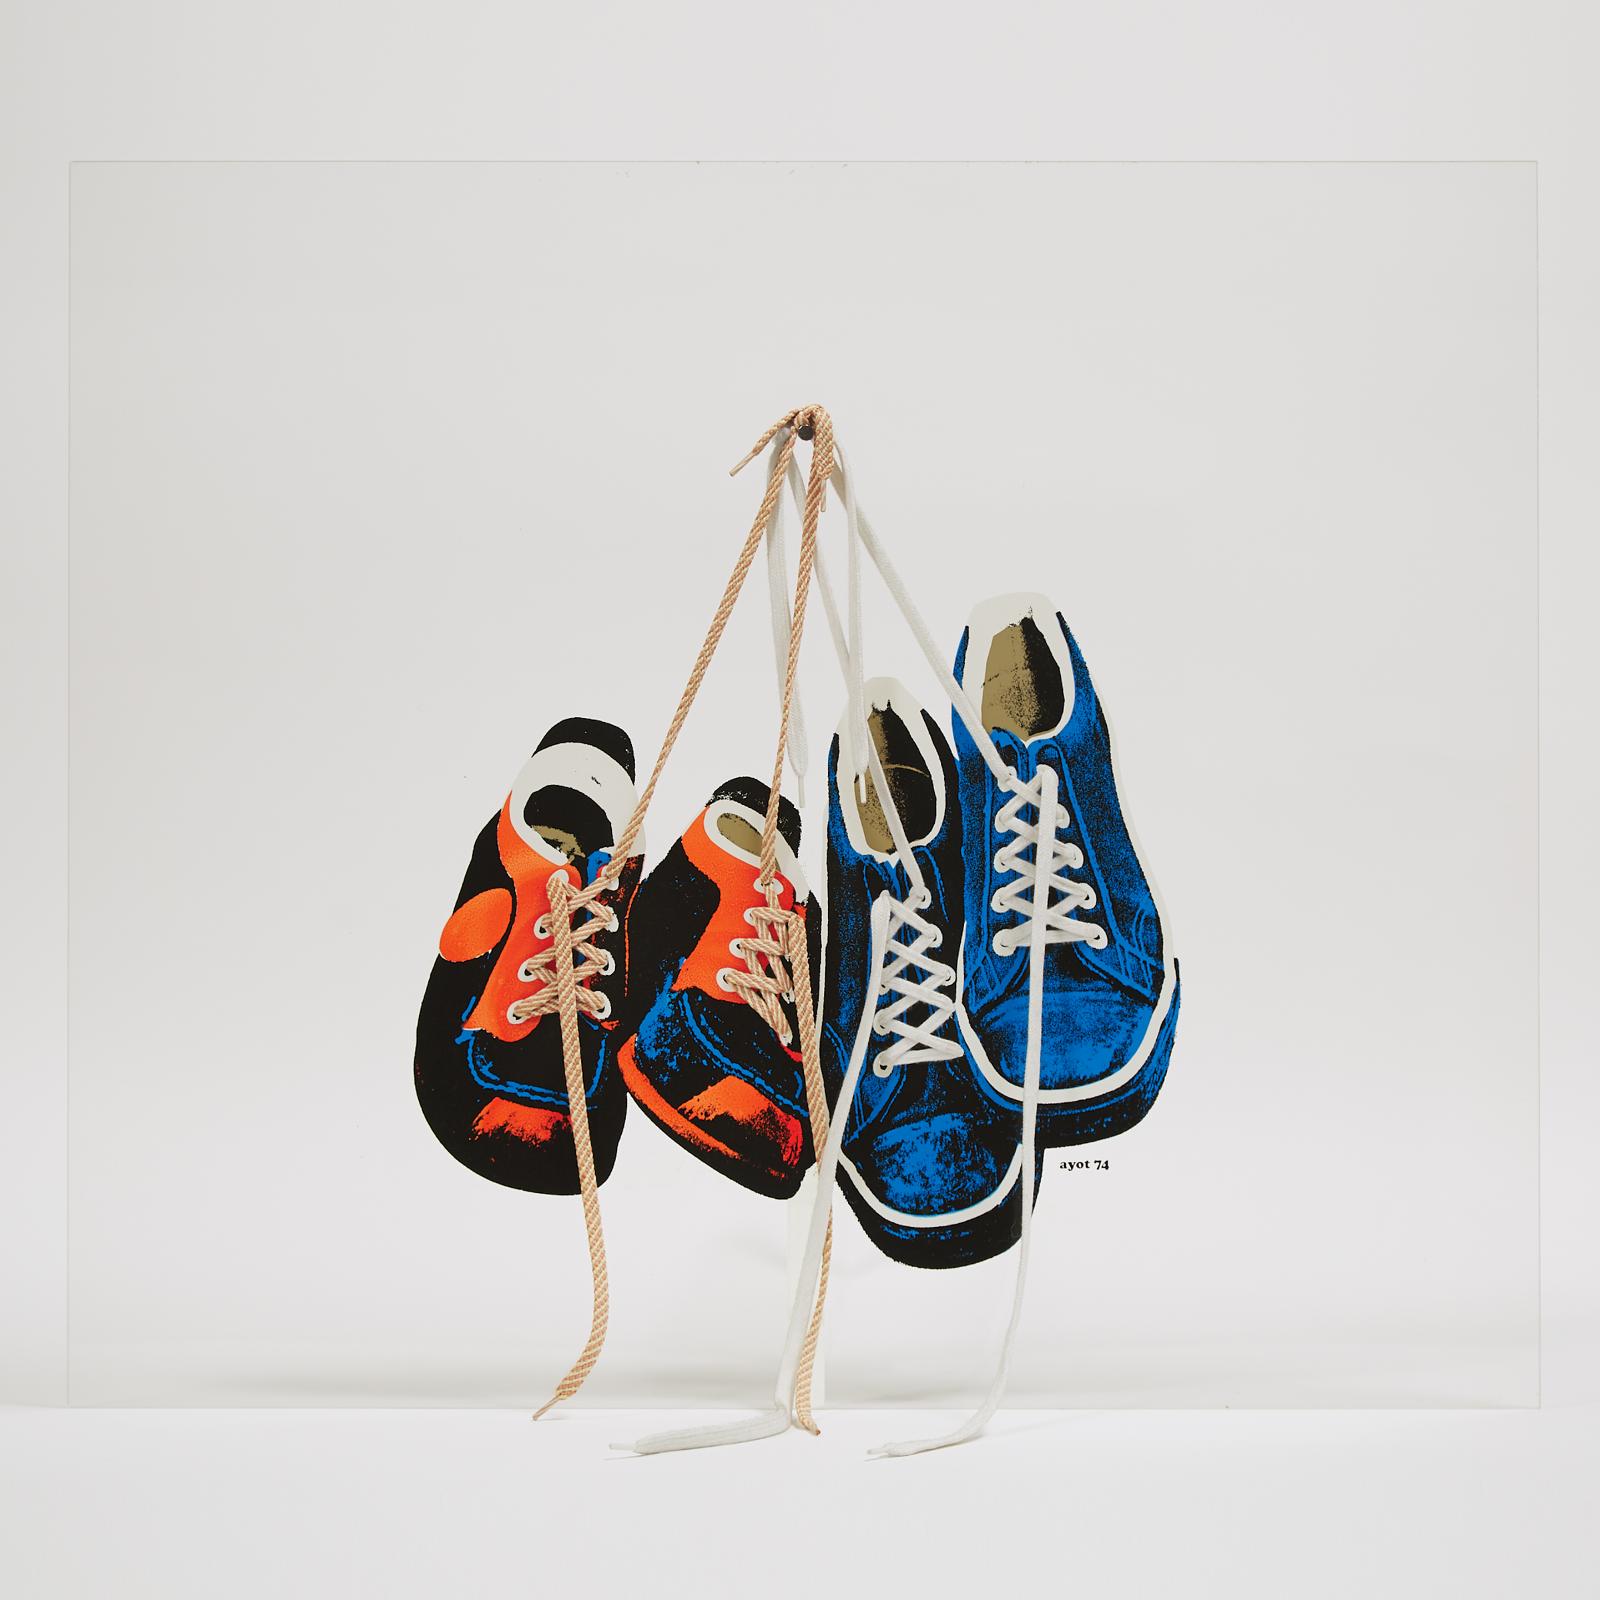 Pierre Ayot (1943-1995) - Spaghetti And Running Shoes, 1974